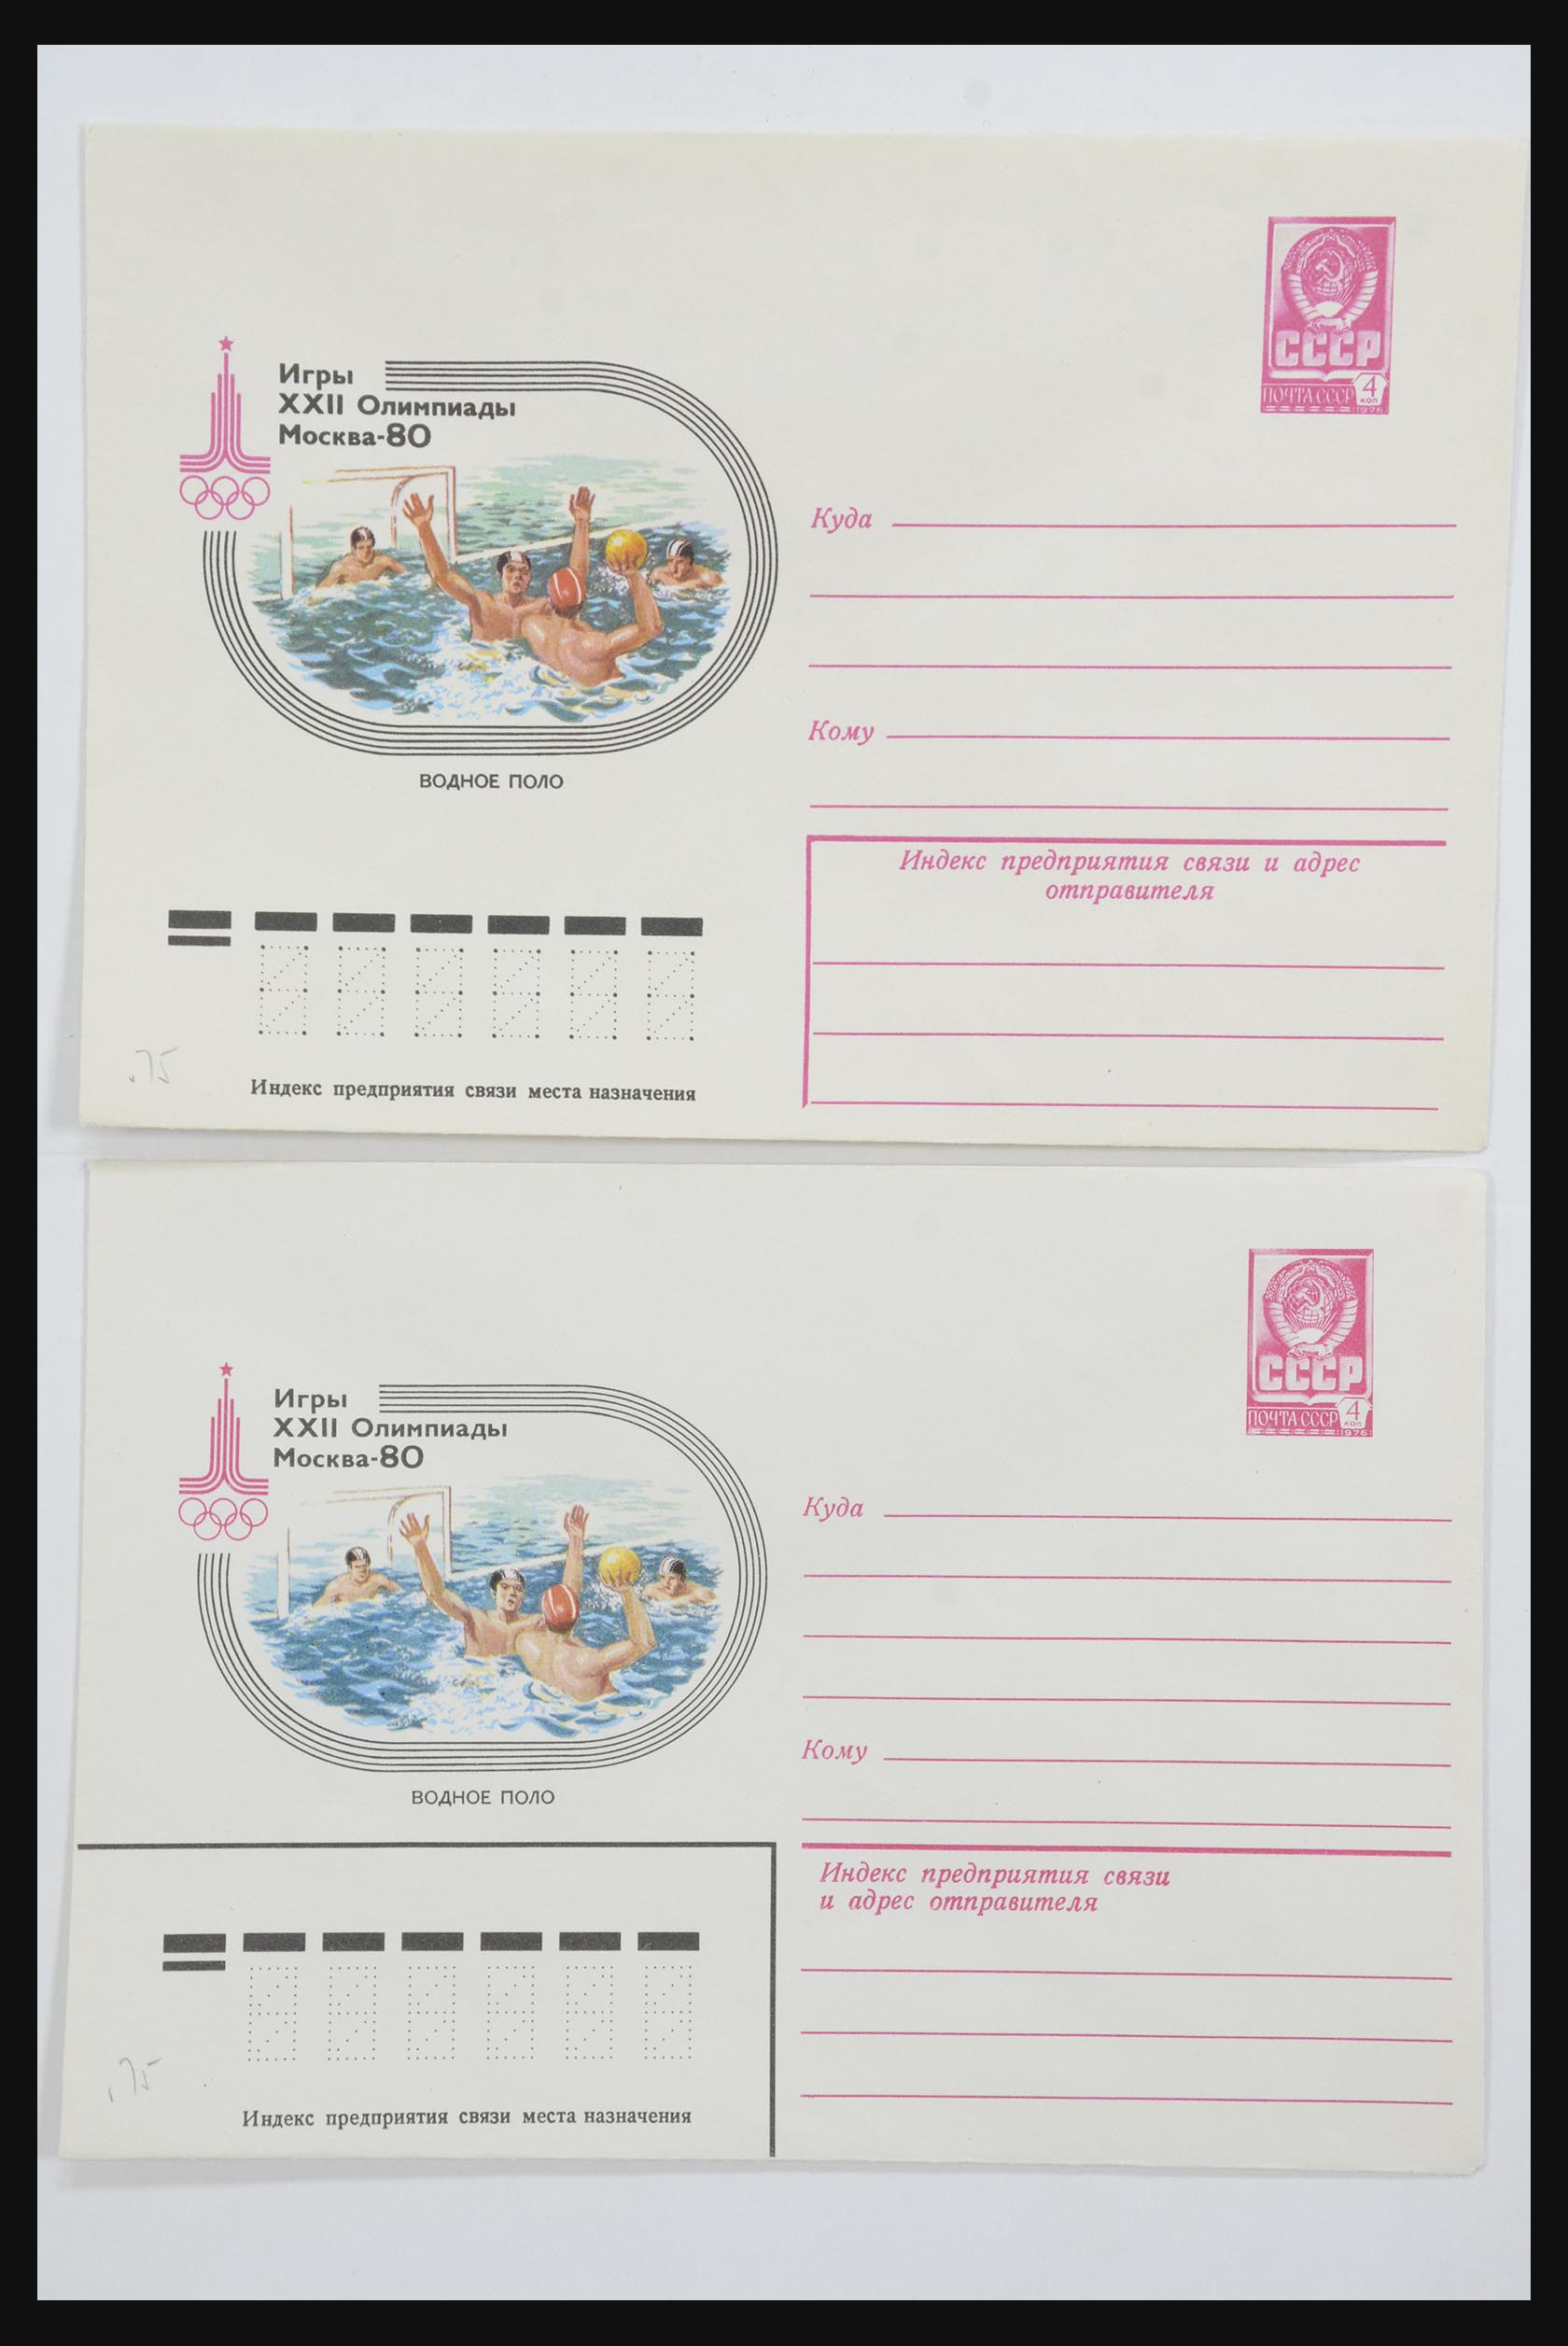 31928 0067 - 31928 Eastern Europe covers 1960's-1990's.